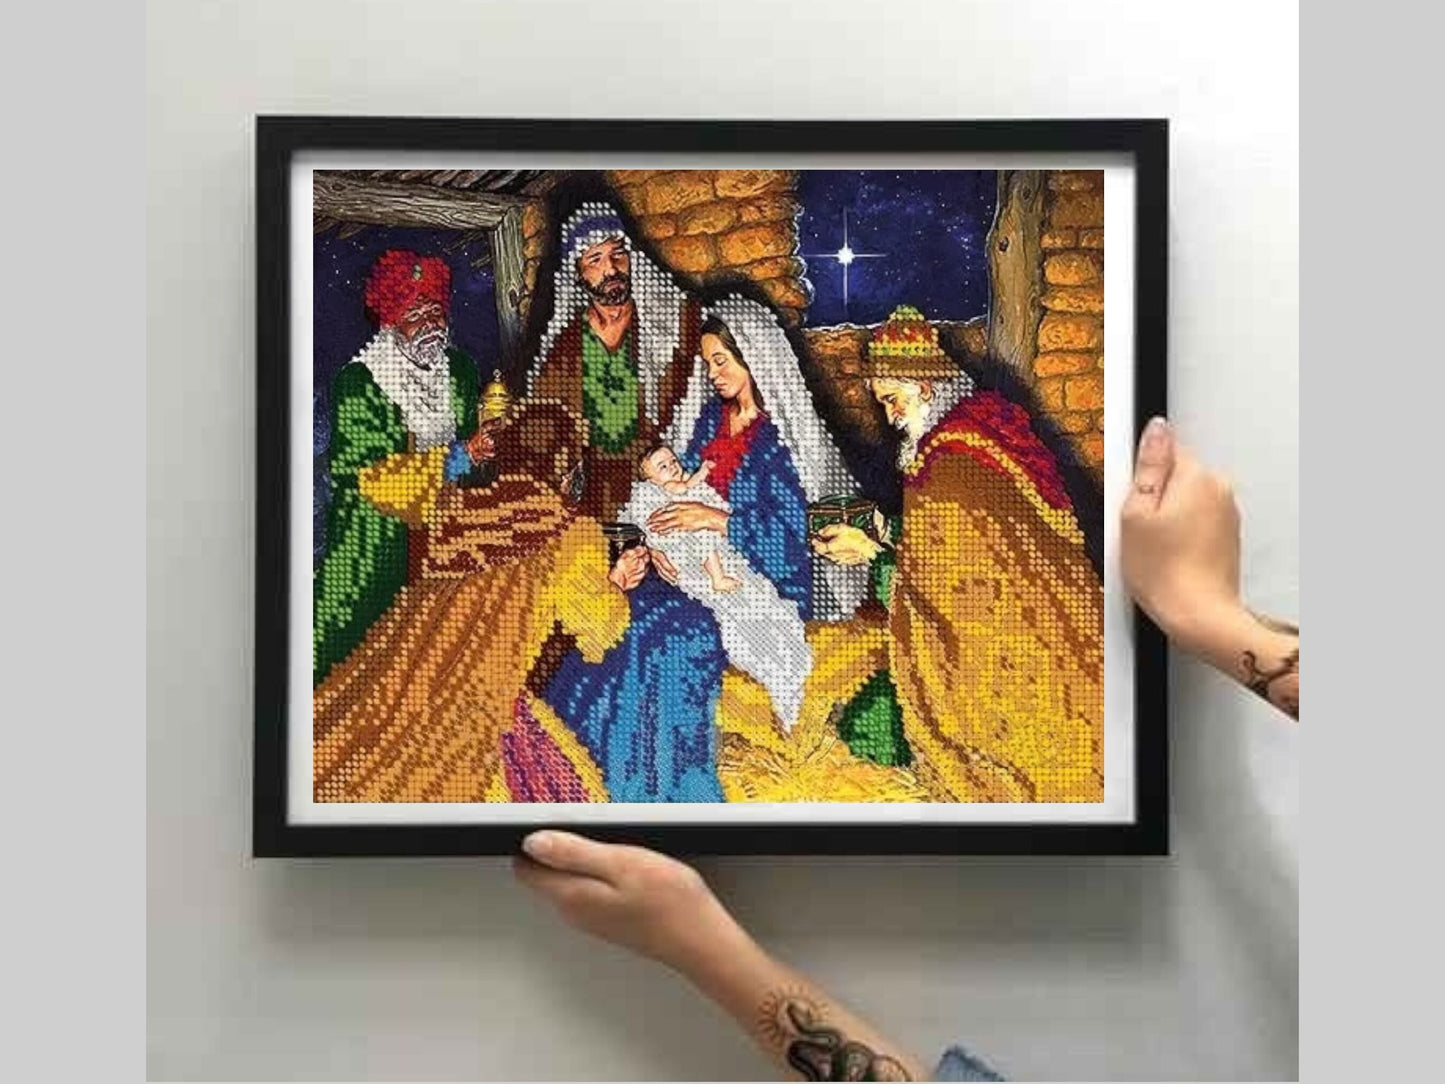 DIY Bead embroidery kit "Christ is born". - VadymShop